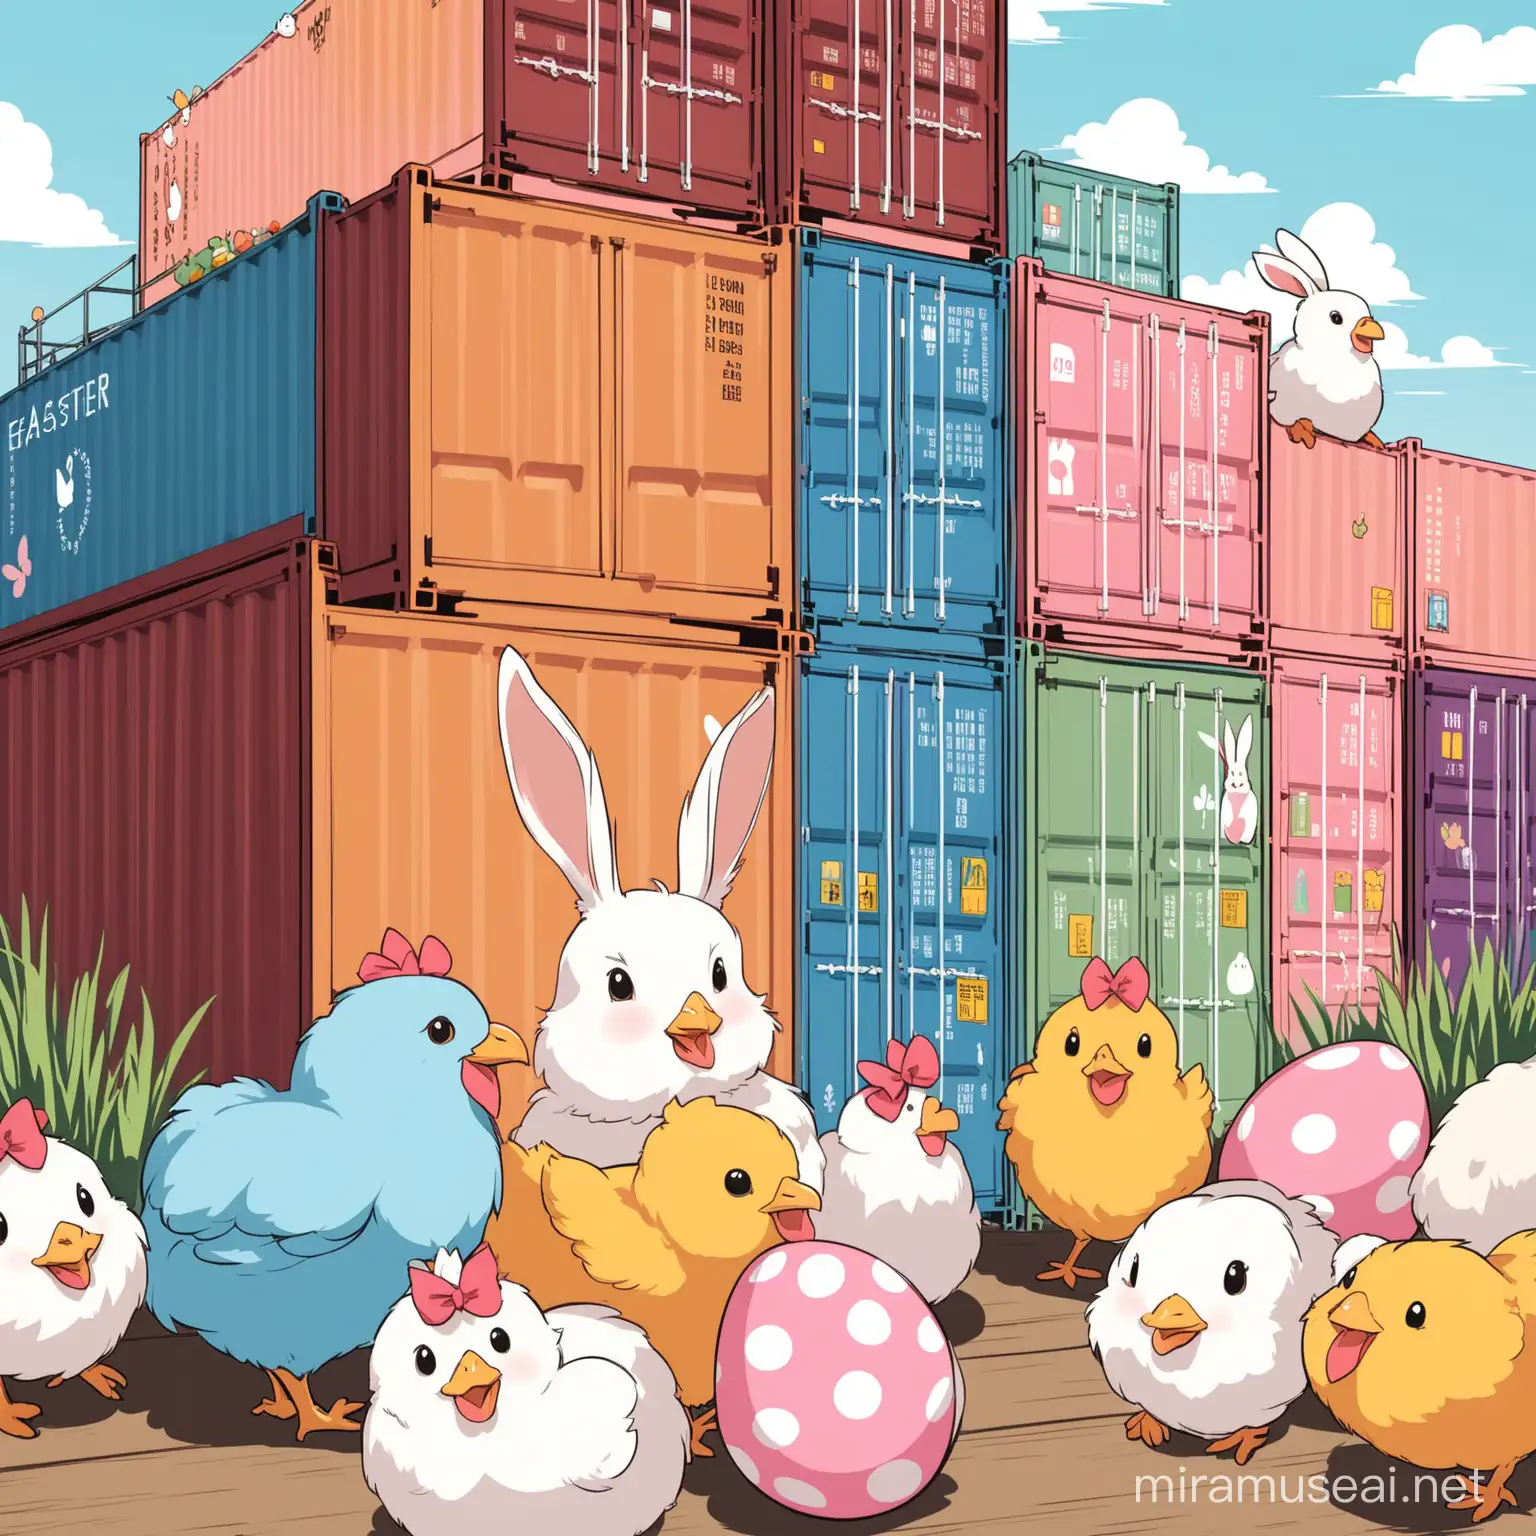 Easter Themed Shipping Containers with Livestock and Decorative Eggs